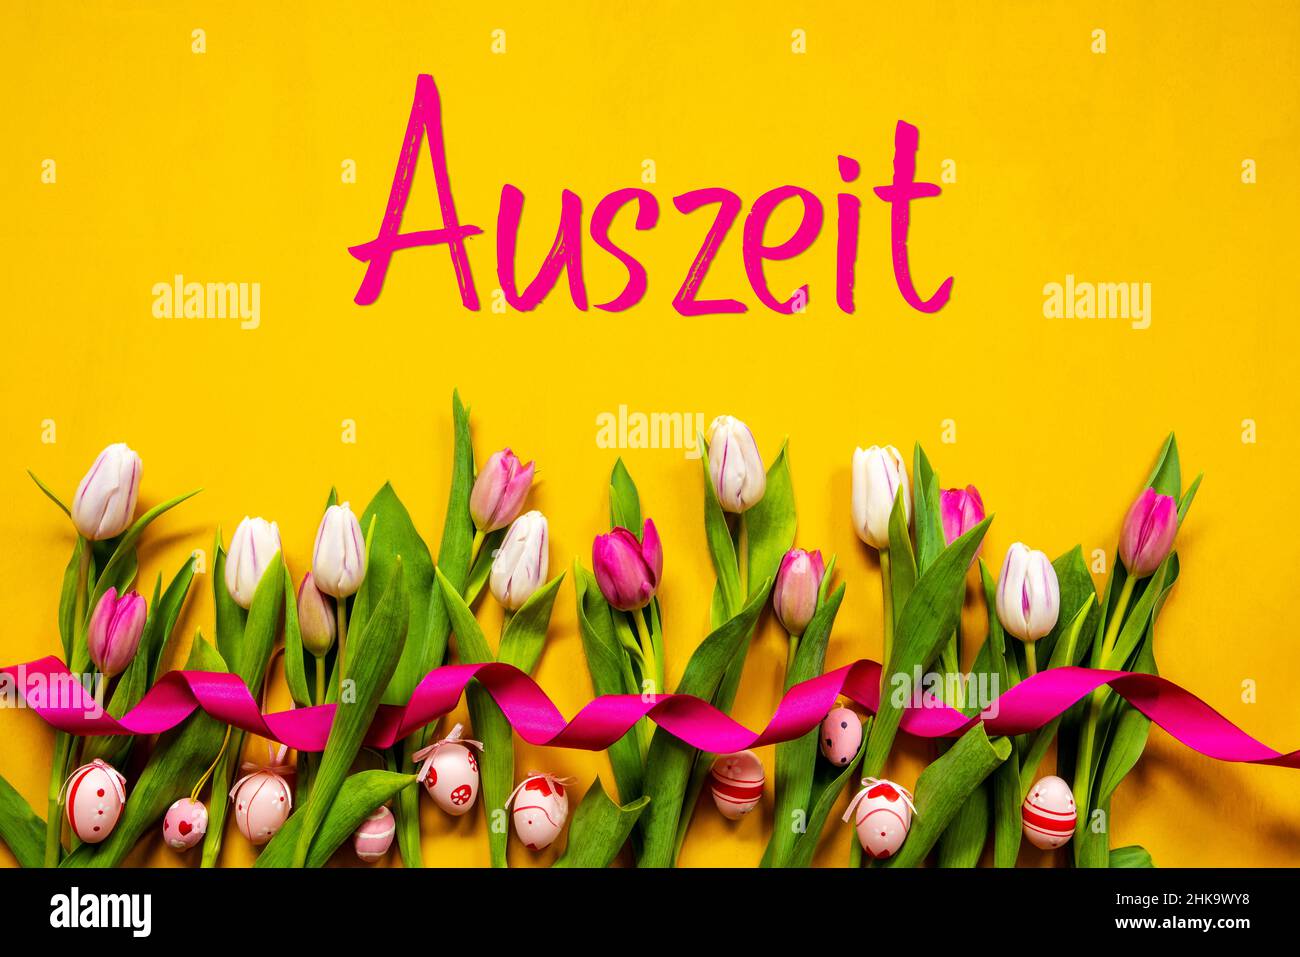 German Text Auszeit Means Downtime. White And Pink Tulip Spring Flowers With Ribbon And Easter Egg Decoration. Yellow Wooden Background Stock Photo